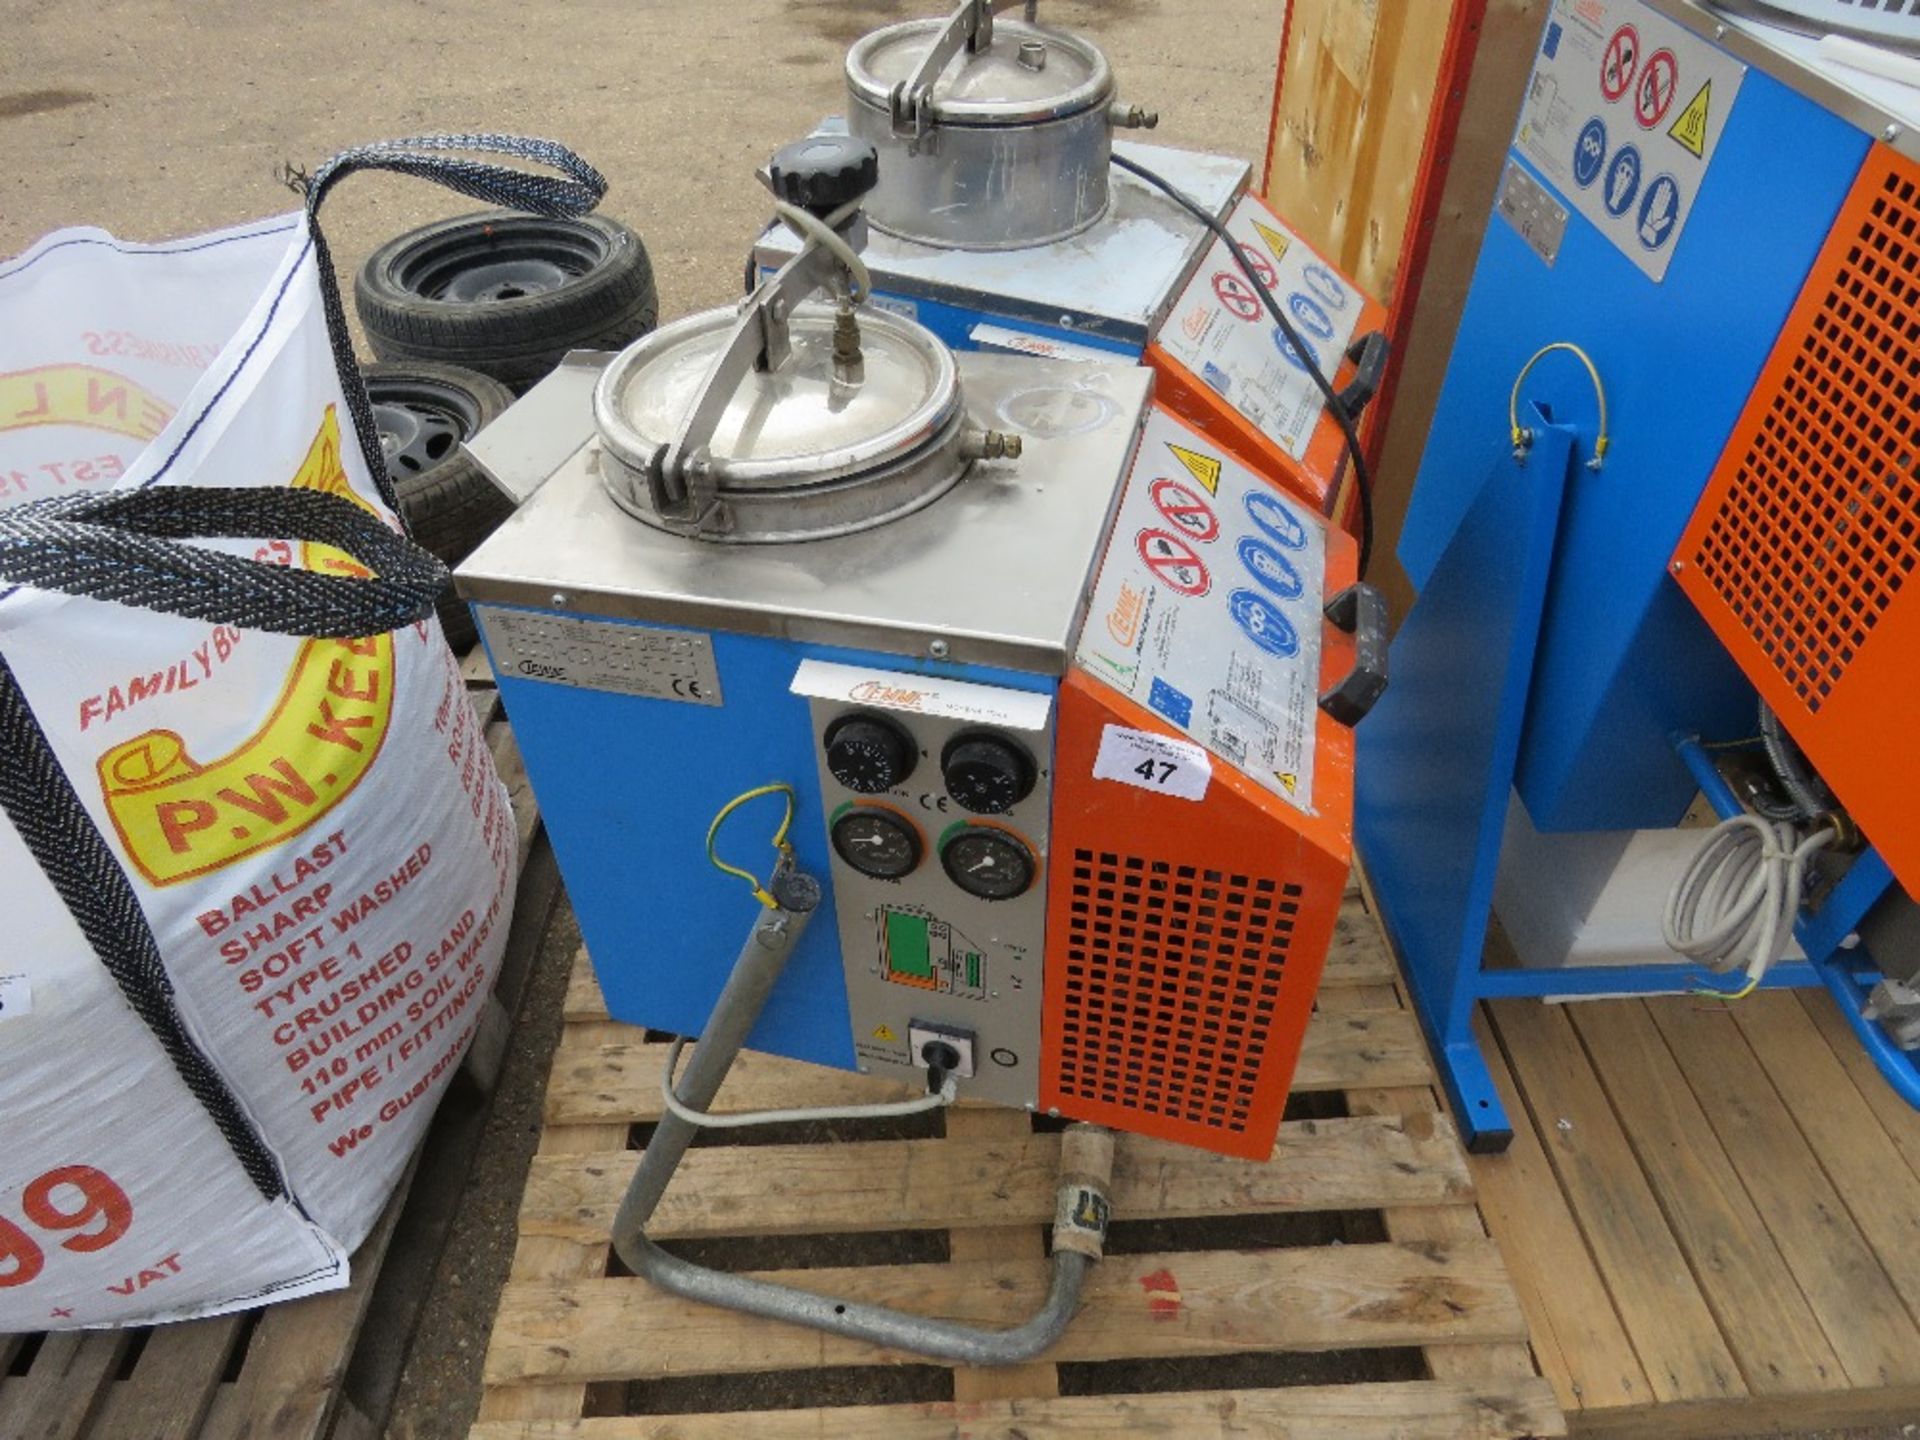 2 X CIEMME K2 SOLVENT RECOVERY UNITS, 220VOLT POWERED. SOURCED FROM COMPANY LIQUIDATION.